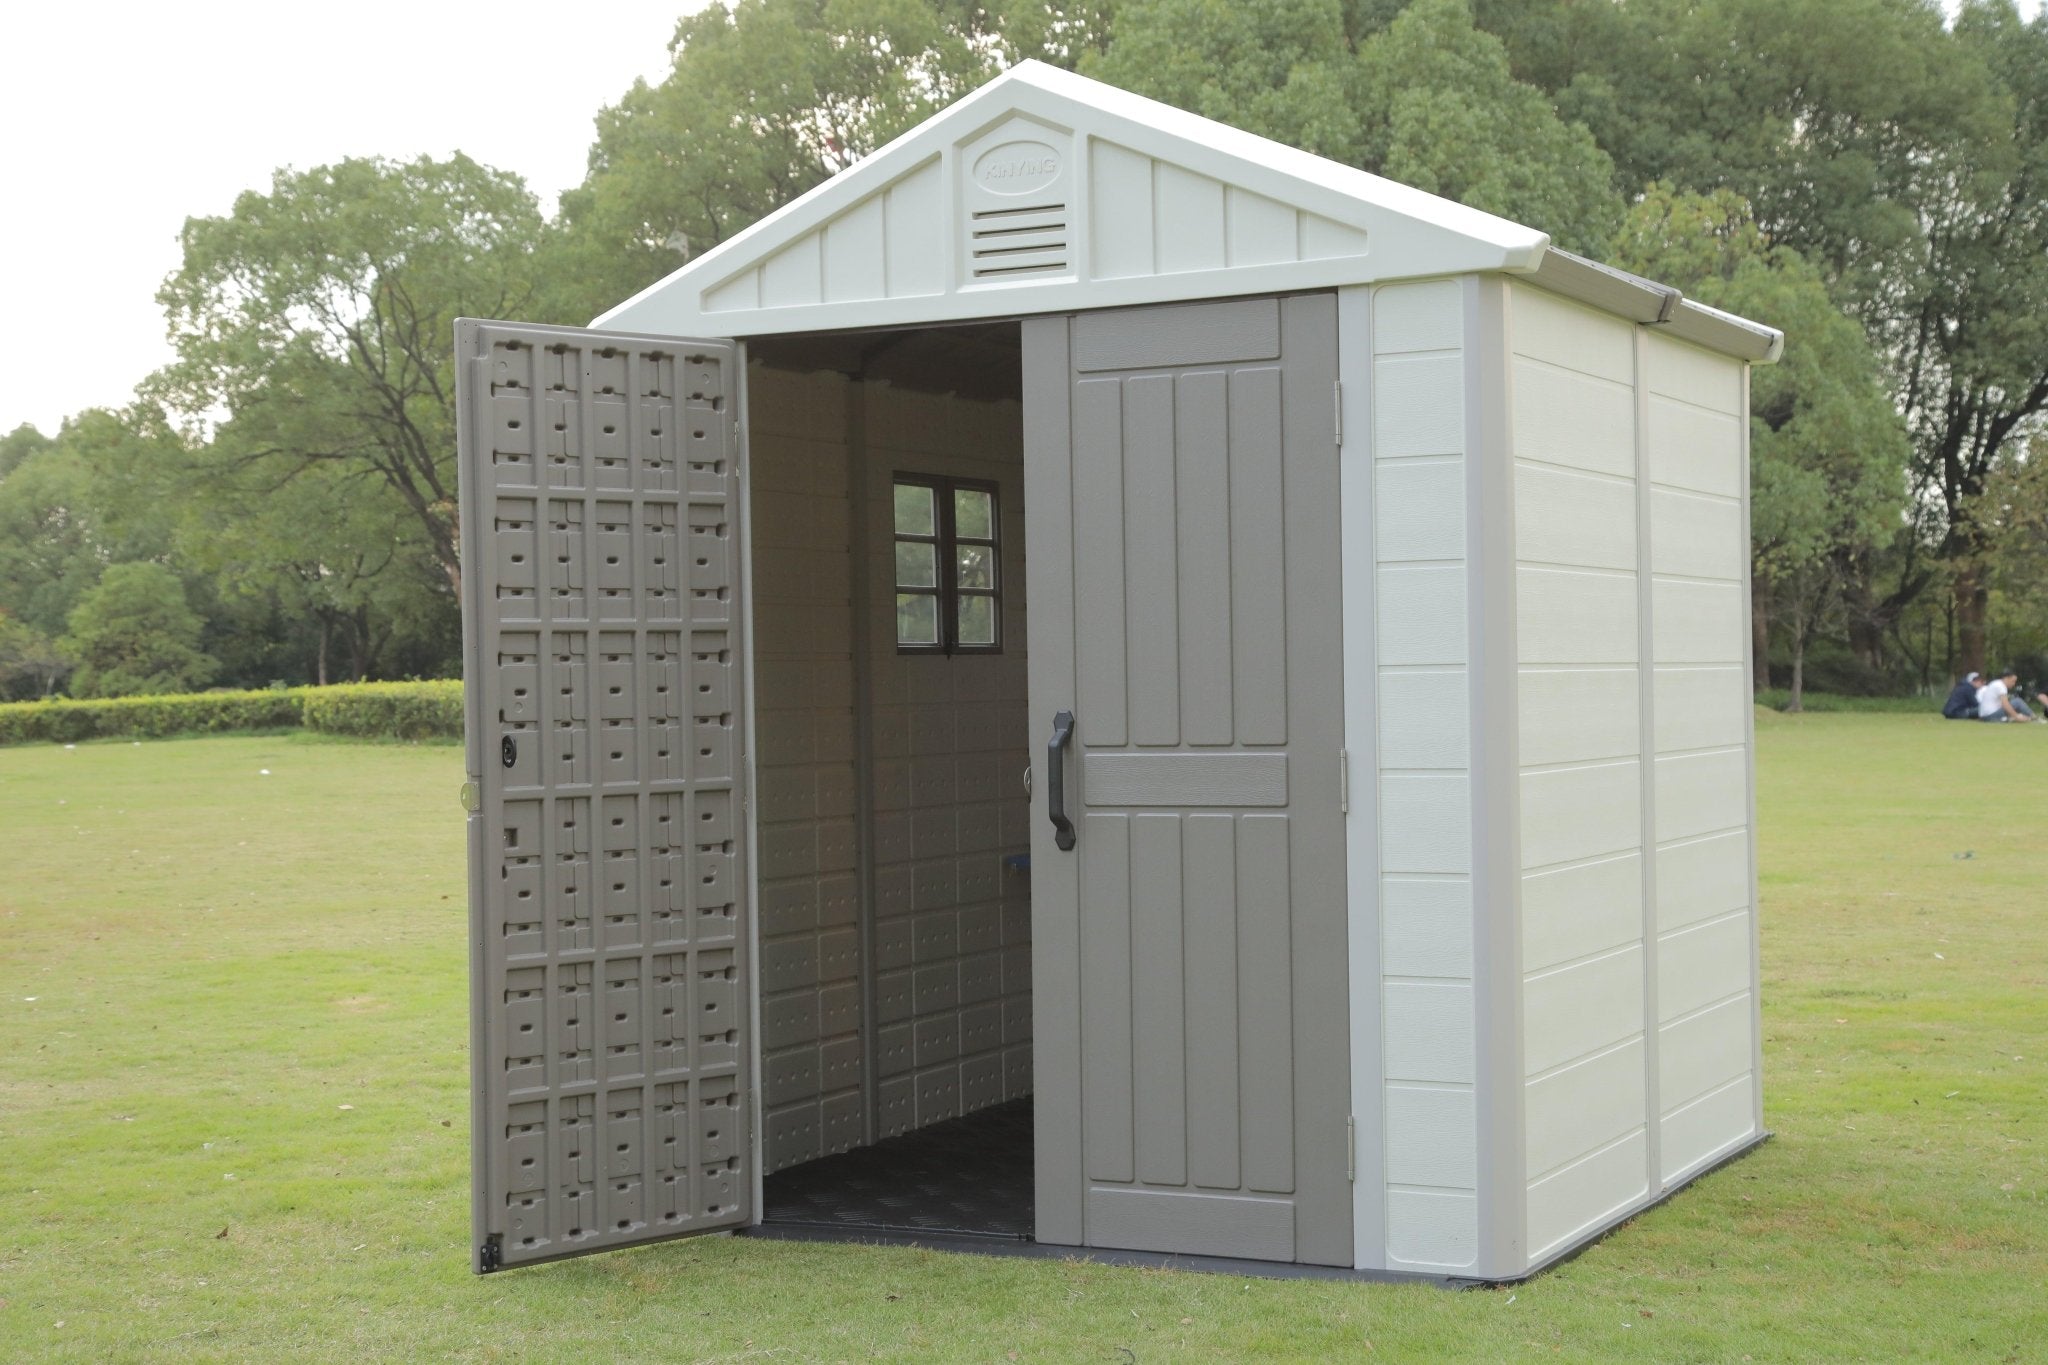 Wooden Sheds, Resin Sheds, Vinyl Sheds – which one is best? - Horti Cubic - Horti Cubic